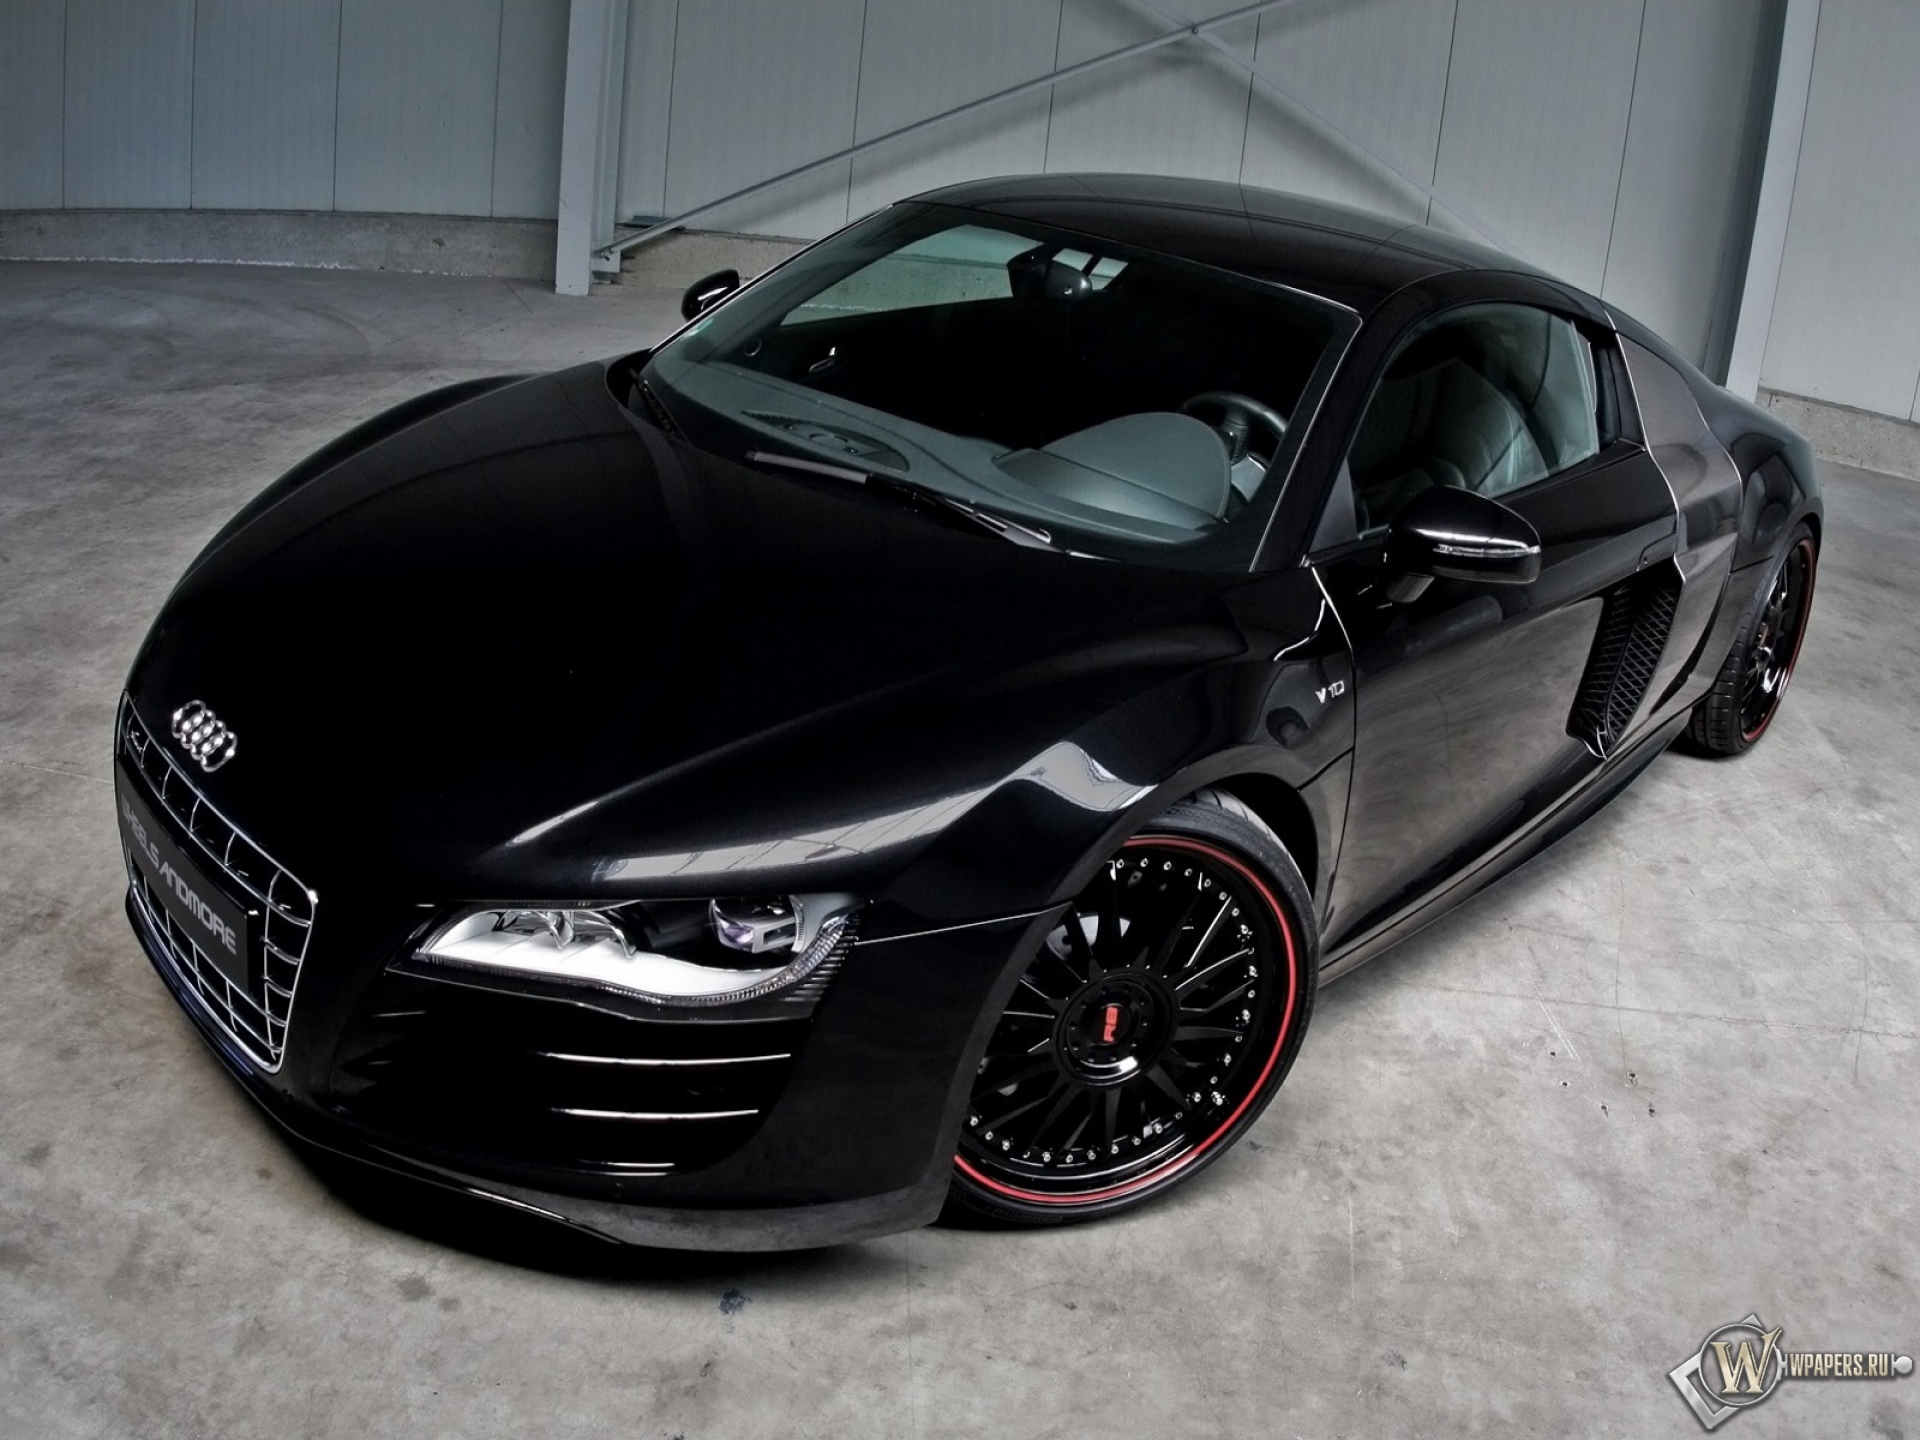 2011 Wheelsandmore Audi R8 V10 .6 - Front Angle Top 1920x1440